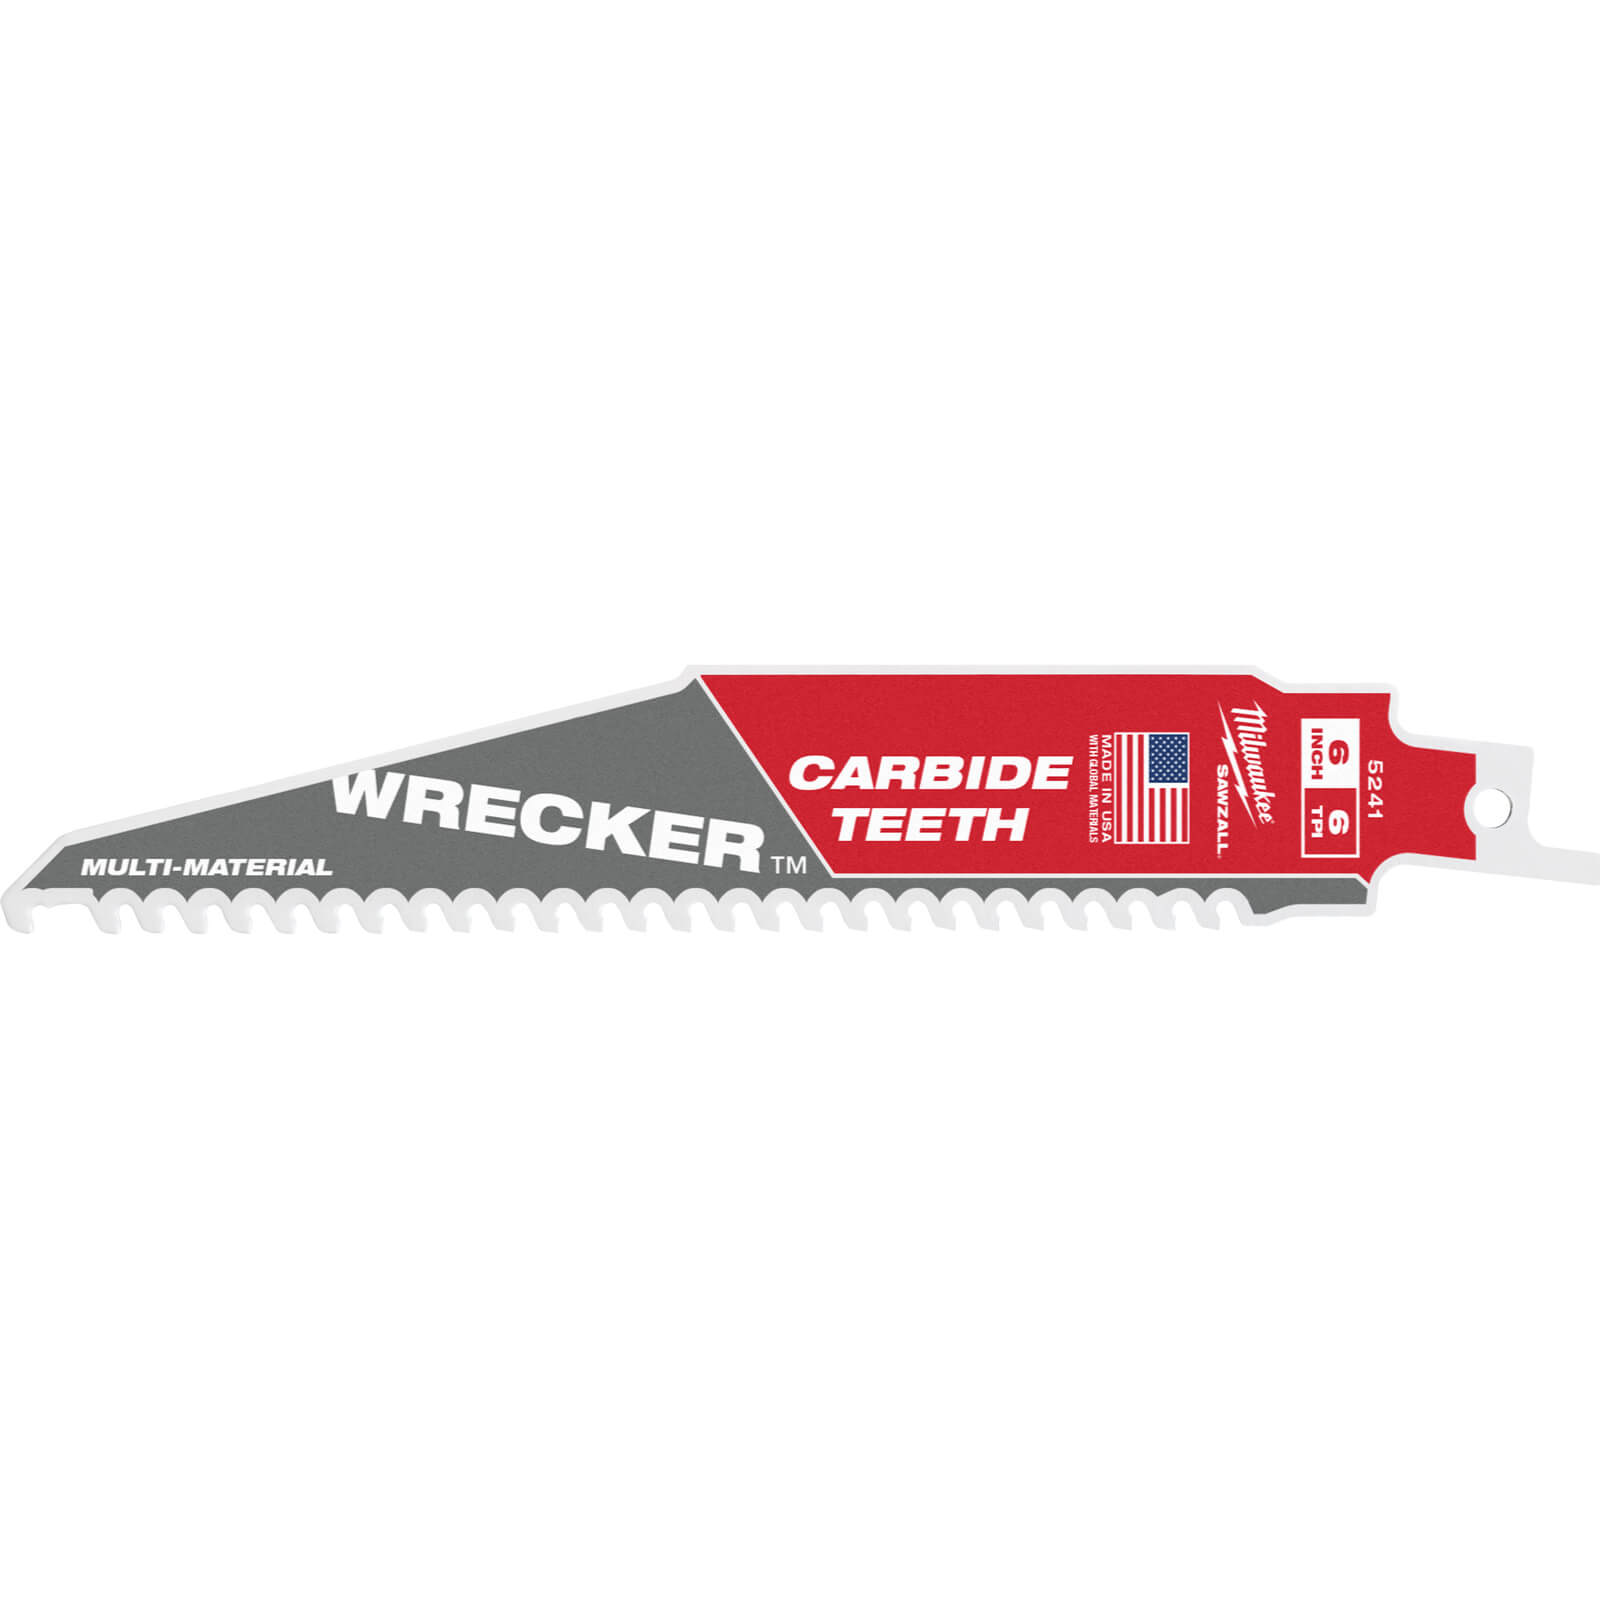 Image of Milwaukee Heavy Duty WRECKER Carbide Demolition Saw Blades 150mm Pack of 1